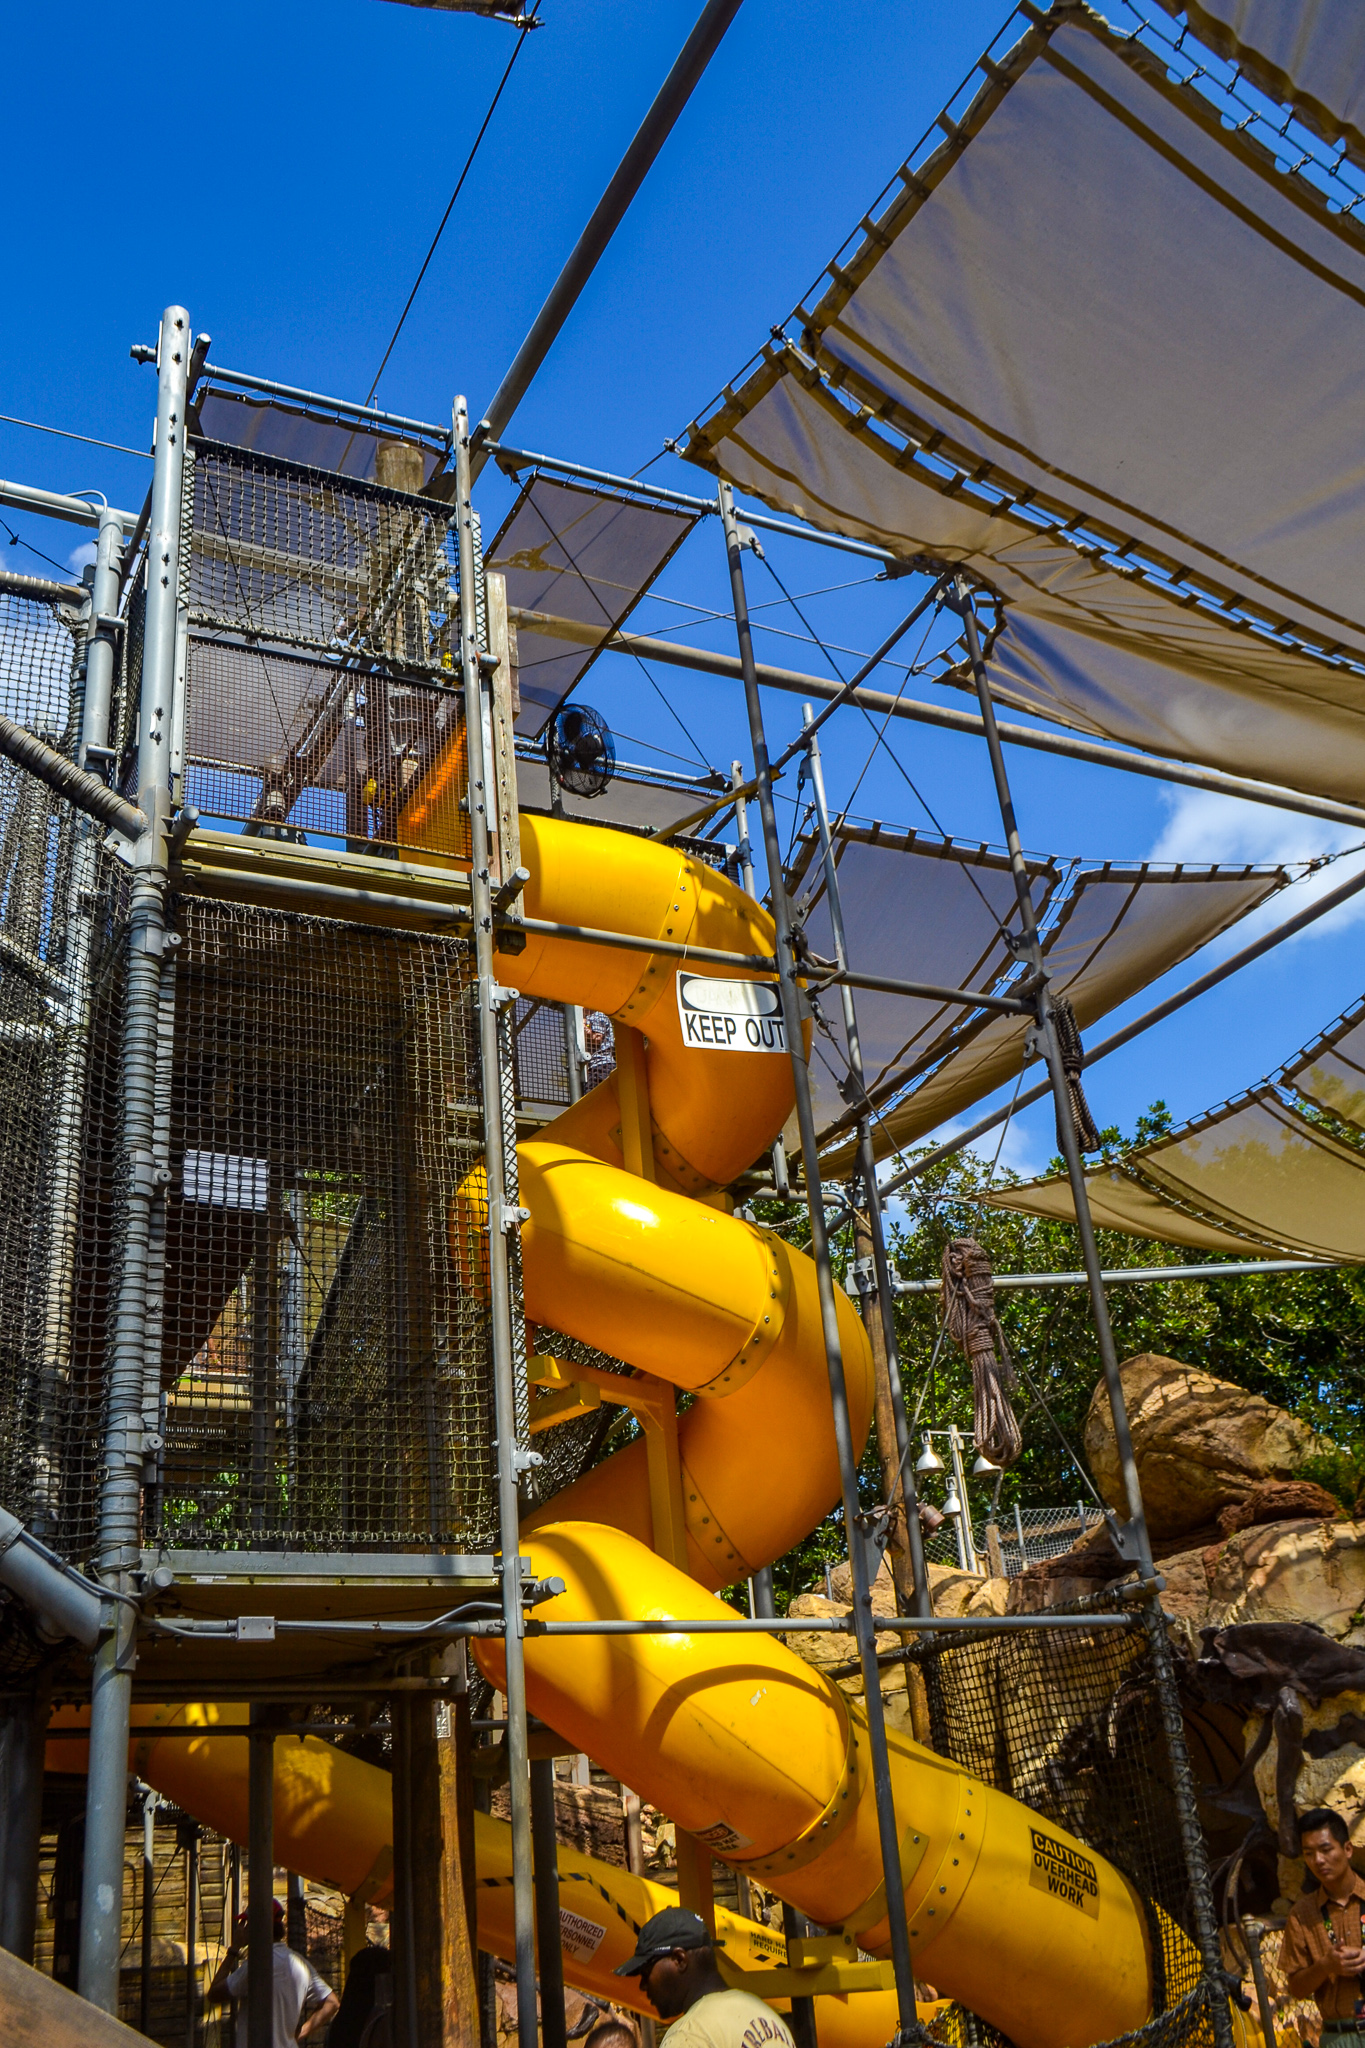 Tall, winding slide in the play area of the Boneyard in Animal Kingdom